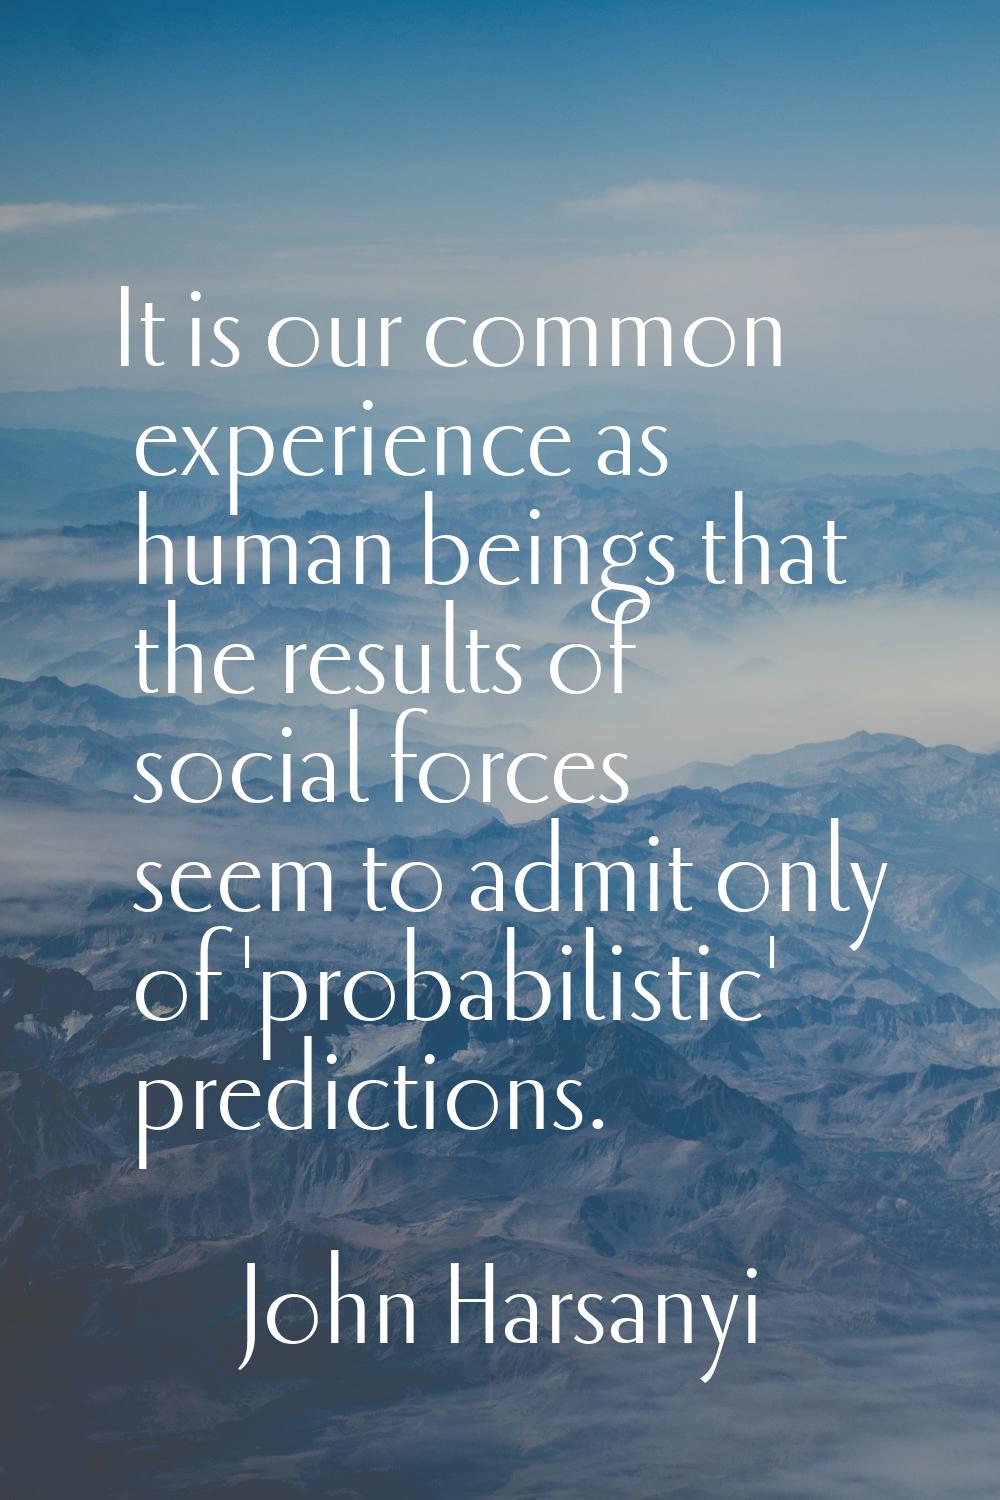 It is our common experience as human beings that the results of social forces seem to admit only of